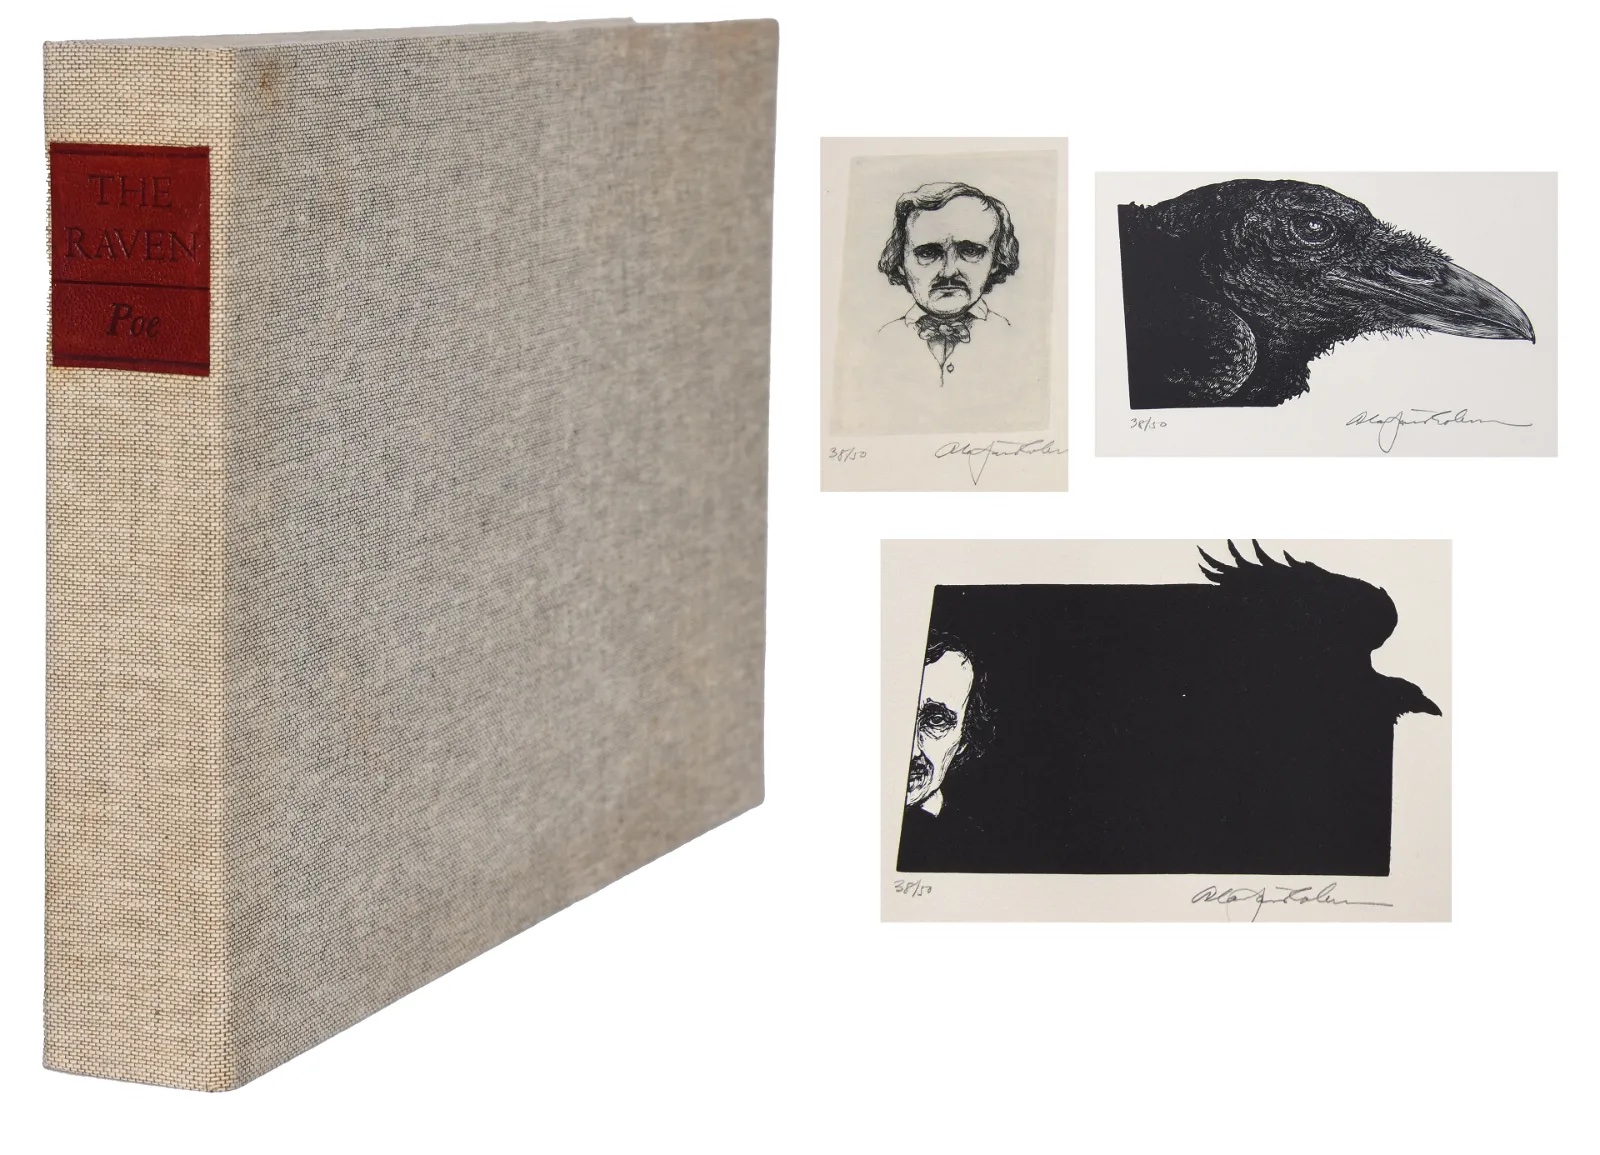 'The Raven' by Edgar Allan Poe, with wood engravings and etchings by Alan James Robinson from an edition of 225 copies, estimated at $1,000-$2,000 at La Belle Epoque.